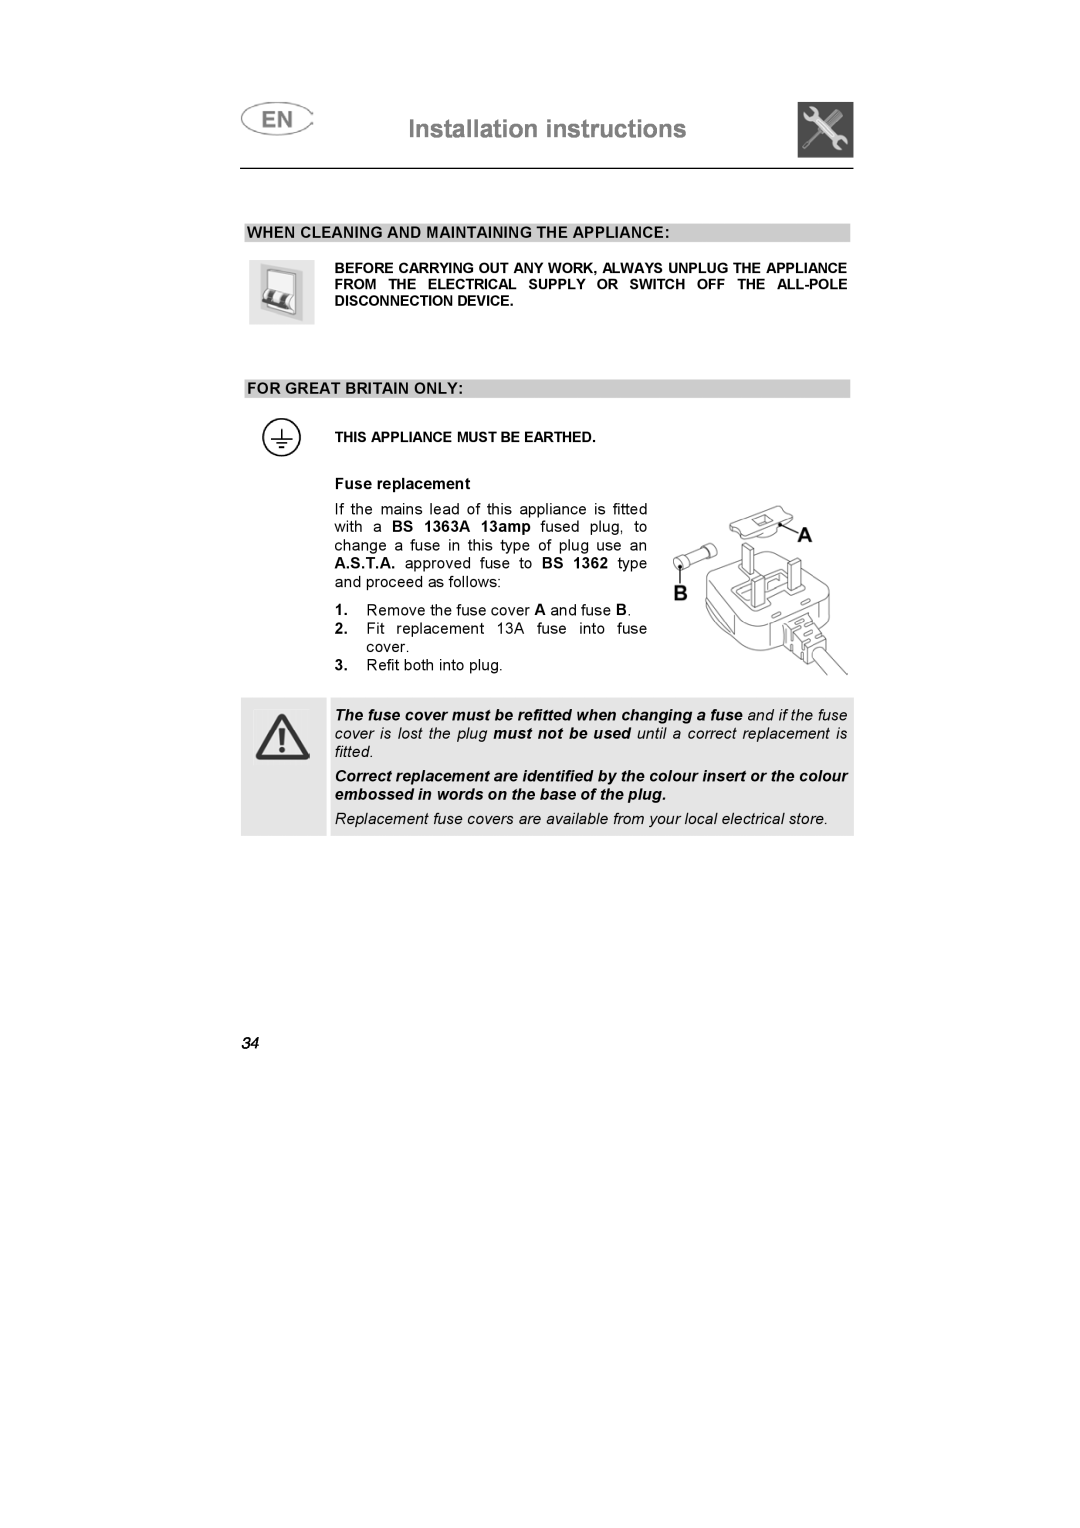 CDA VW80 When Cleaning And Maintaining The Appliance, For Great Britain Only, Fuse replacement, Installation instructions 